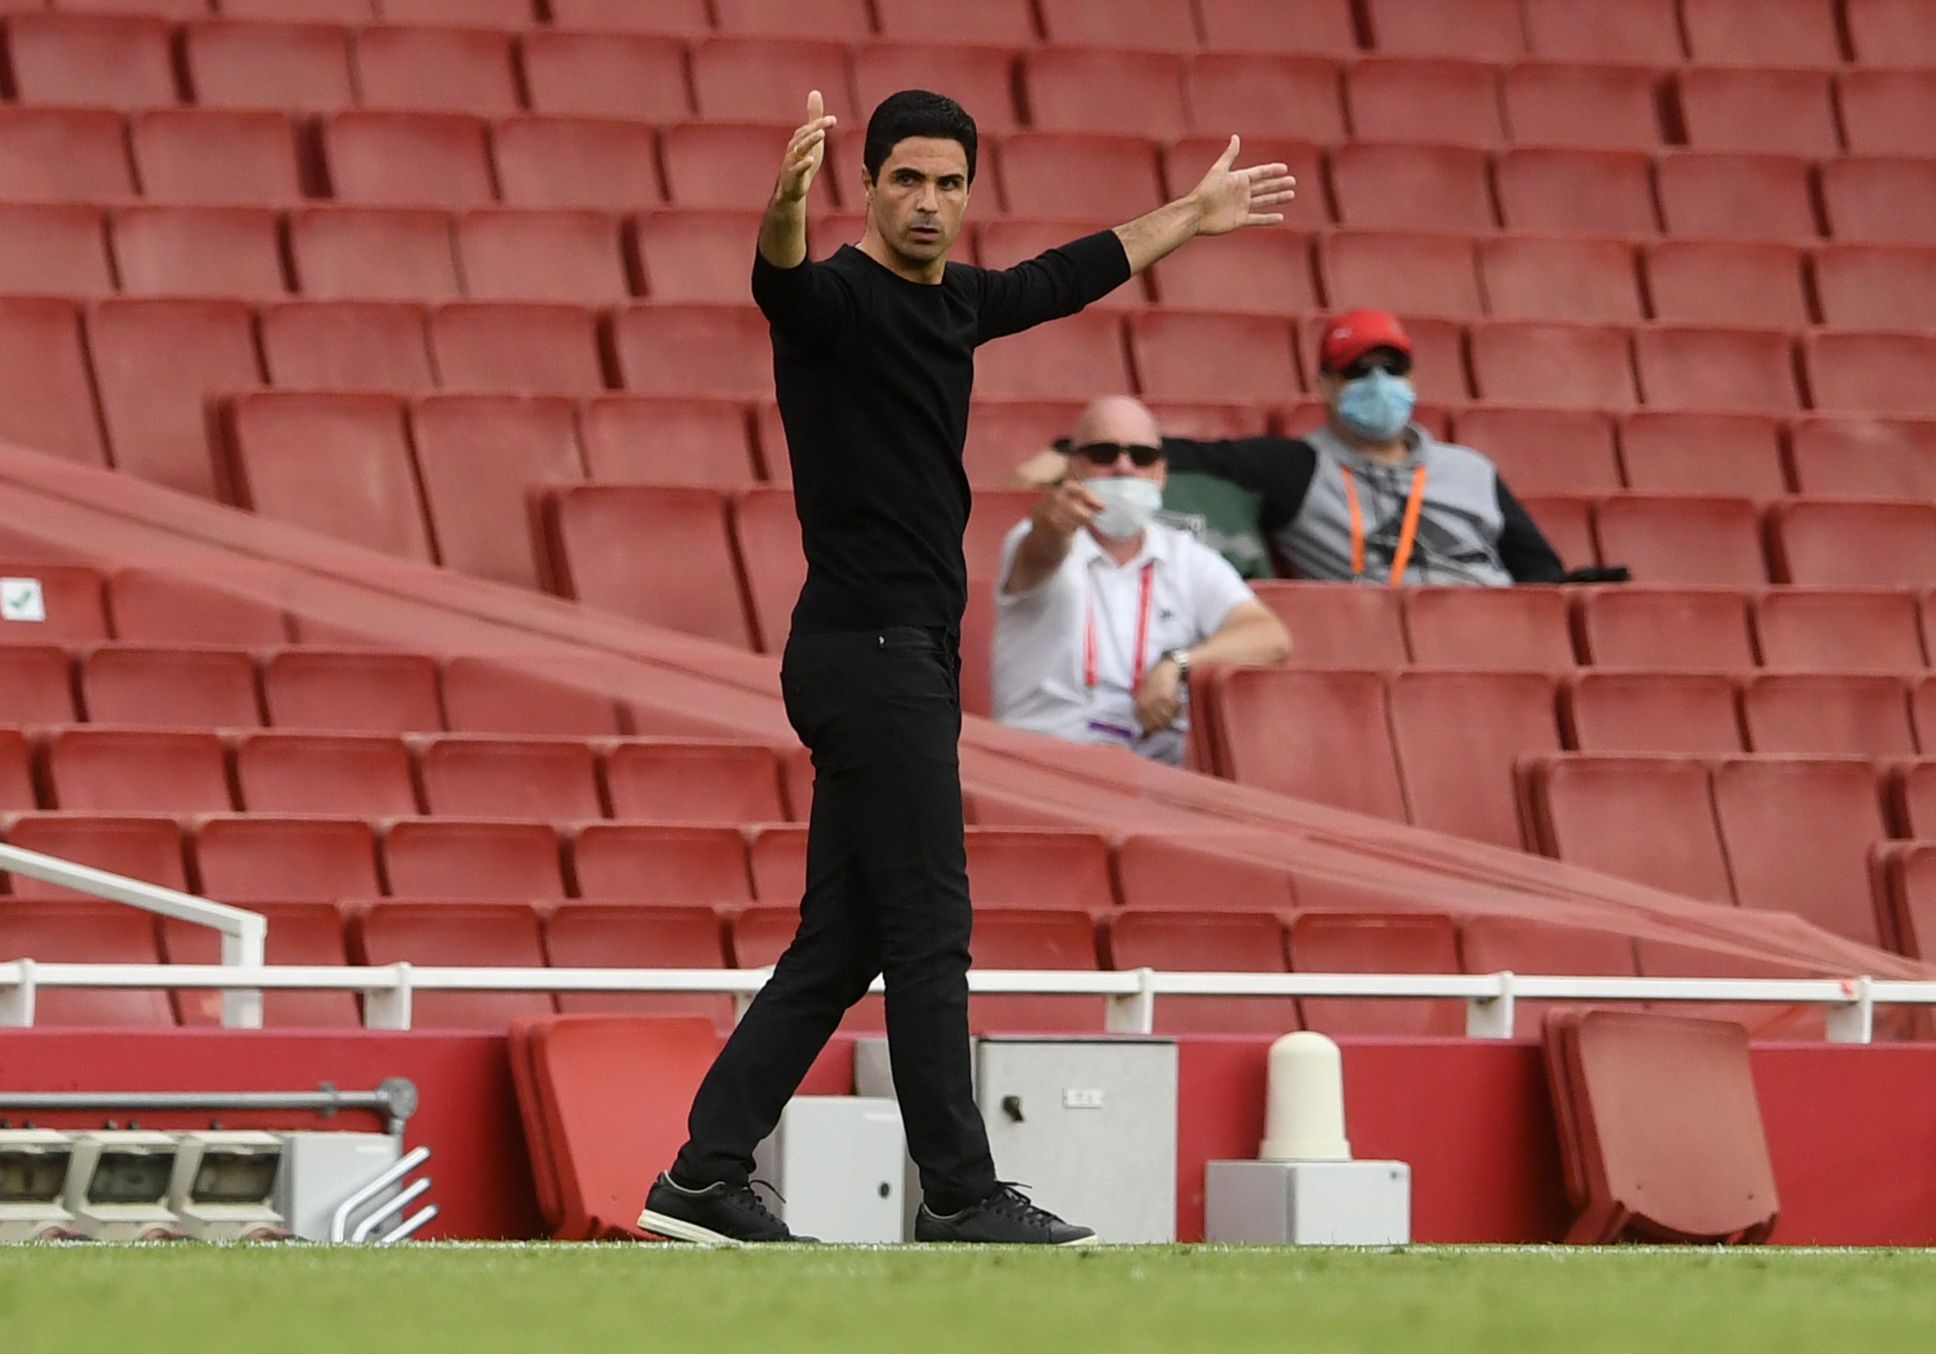 Soccer Football - Premier League - Arsenal v Watford - Emirates Stadium, London, Britain - July 26, 2020 Arsenal manager Mikel Arteta reacts, as play resumes behind closed doors following the outbreak of the coronavirus disease (COVID-19) Pool via REUTERS/Neil Hall EDITORIAL USE ONLY. No use with unauthorized audio, video, data, fixture lists, club/league logos or 'live' services. Online in-match use limited to 75 images, no video emulation. No use in betting, games or single club/league/player 